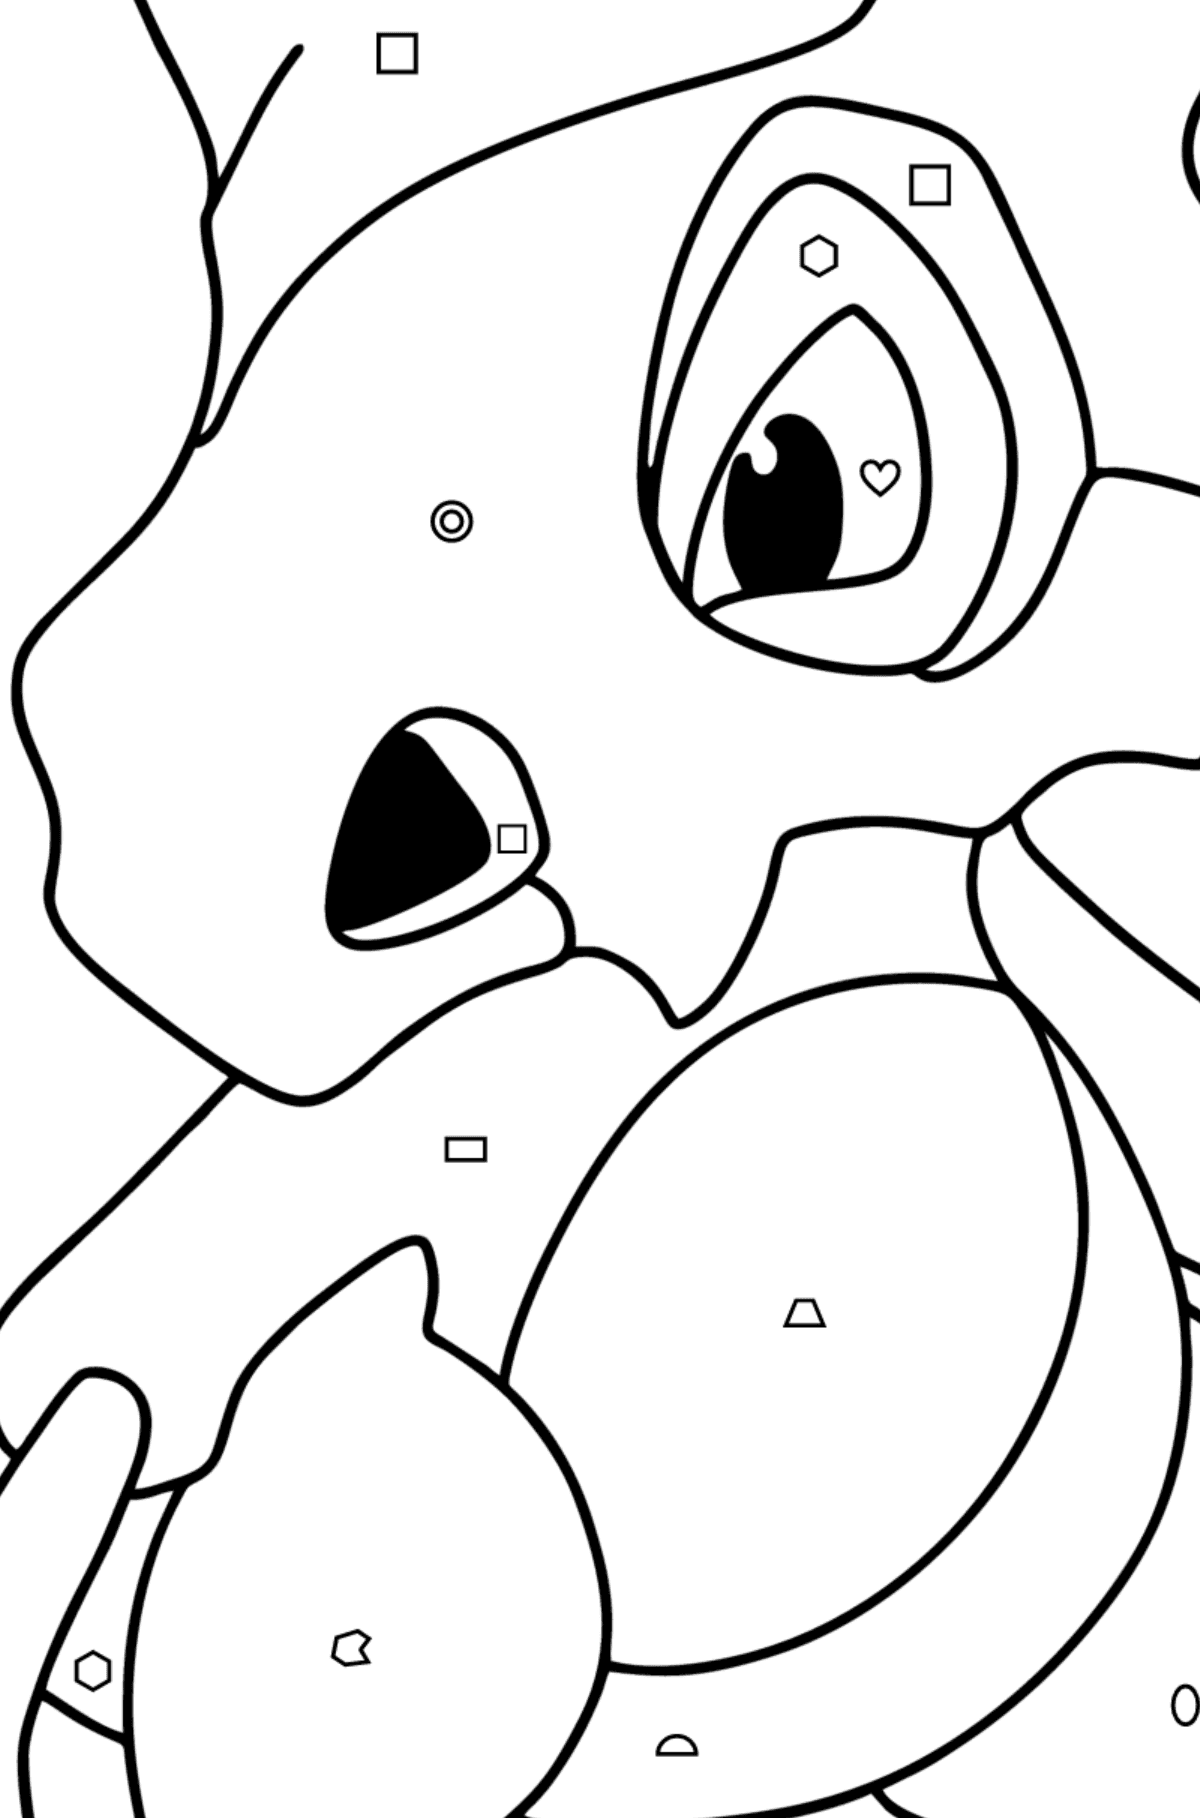 Coloring page Pokemon Go Cubone - Coloring by Geometric Shapes for Kids